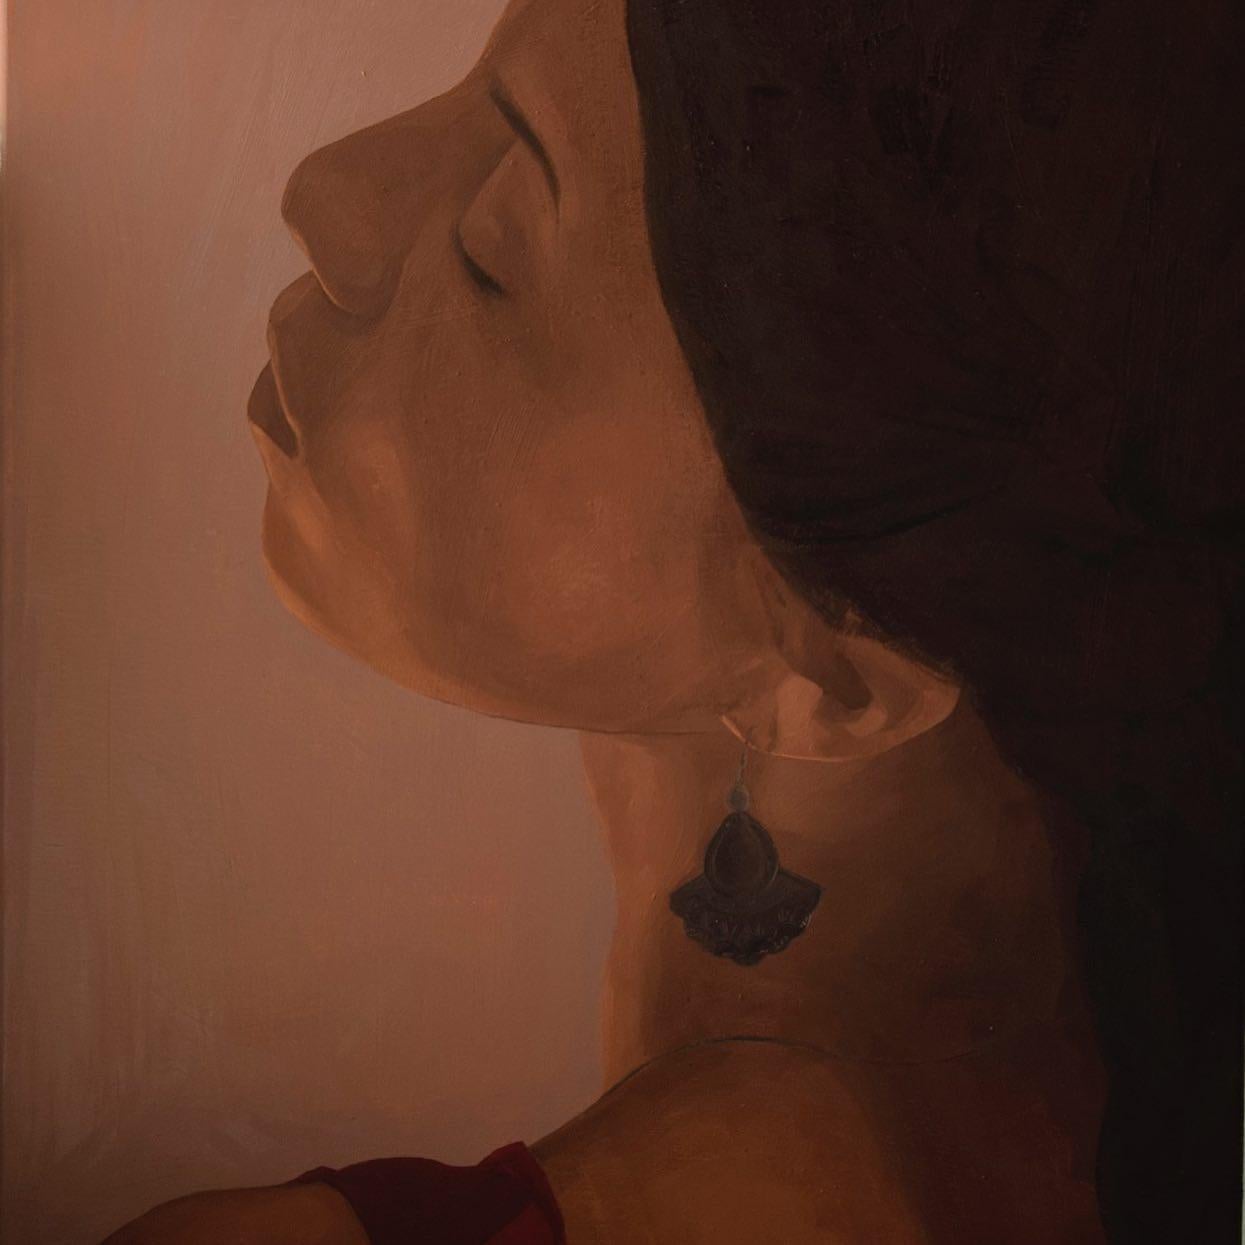 "Insight 3" Oil Painting 20" x 18" inch by Sarah Tantawy

Sara Tantawy, a fresh graduate from Cairo, produces figurative art in a method that is currently
￼expressive of grief, longing and a soul-searching quest for stability. Her canvases involve a